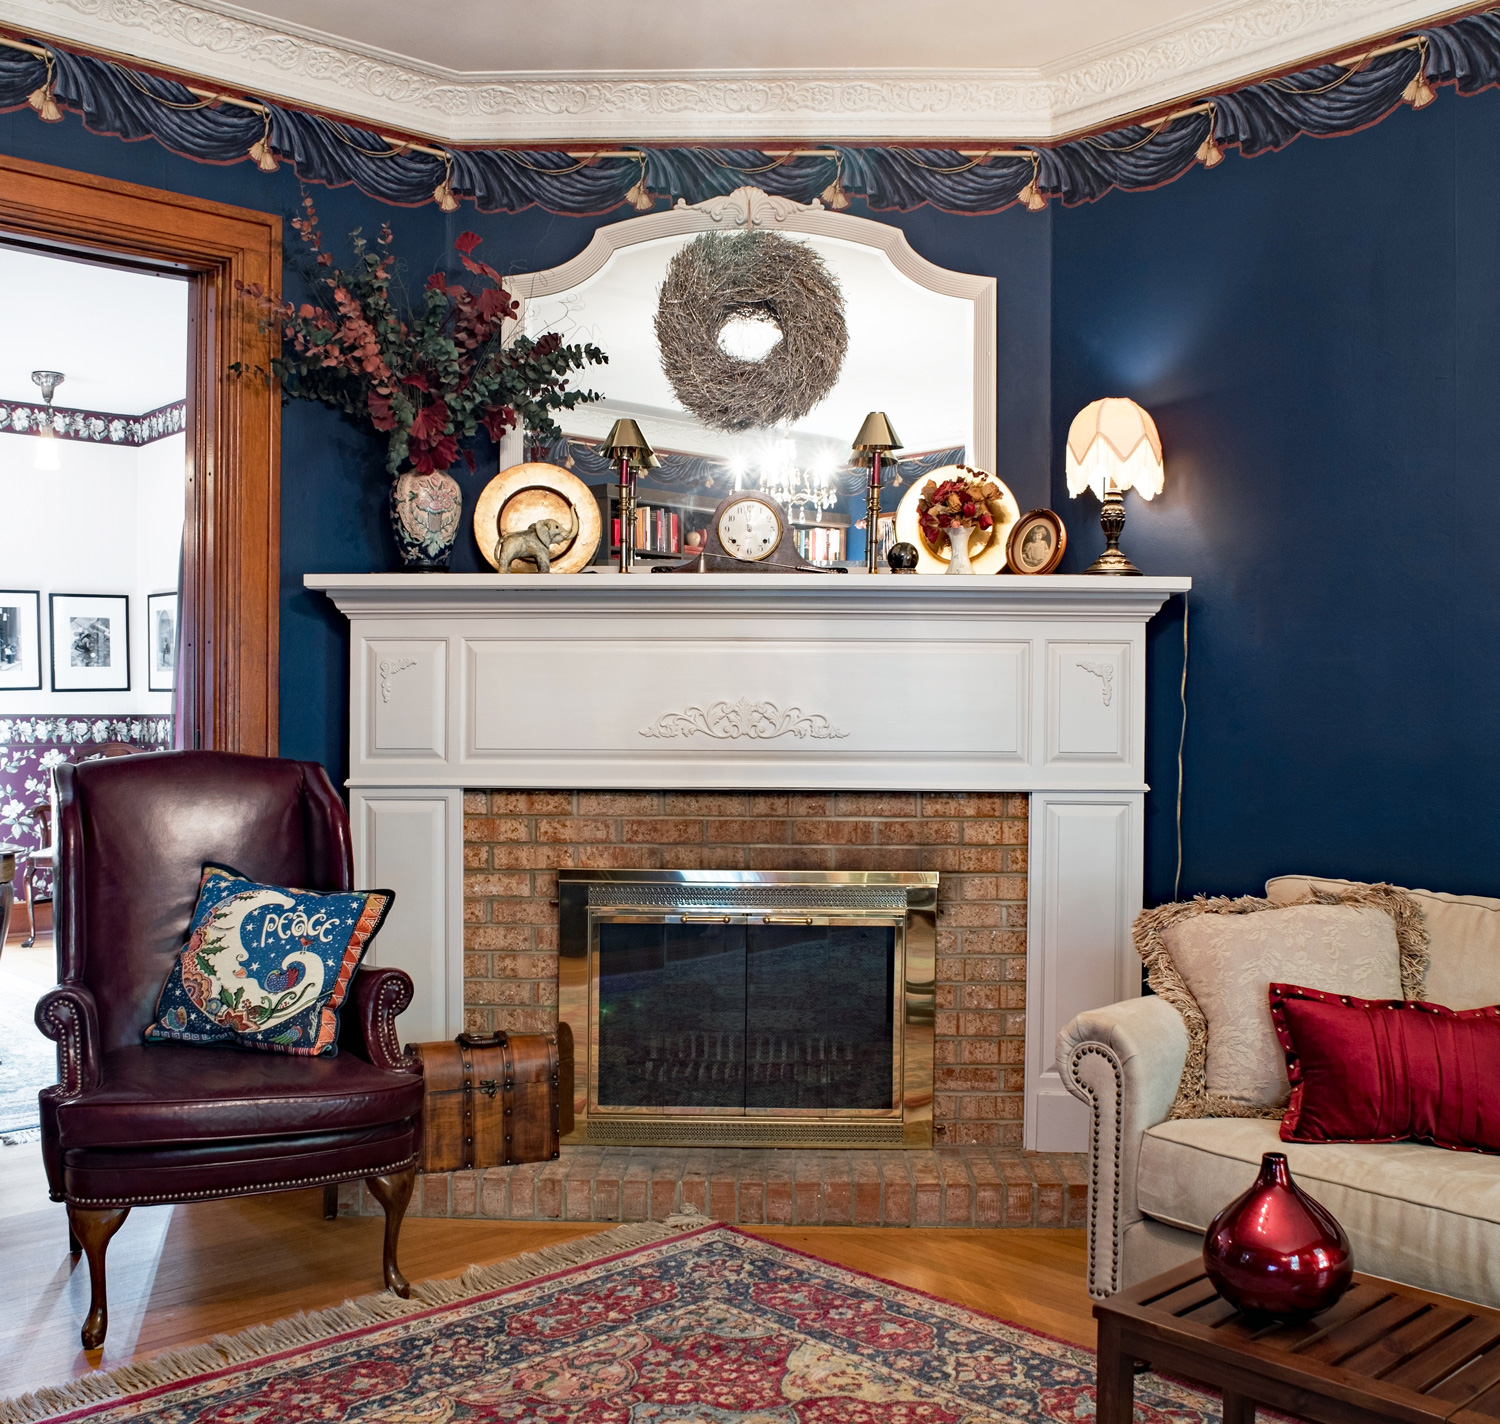 Brick fireplace with painted mantel in a Victorian living room with navy blue walls & ten foot ceiling in one hundred-year-old home.